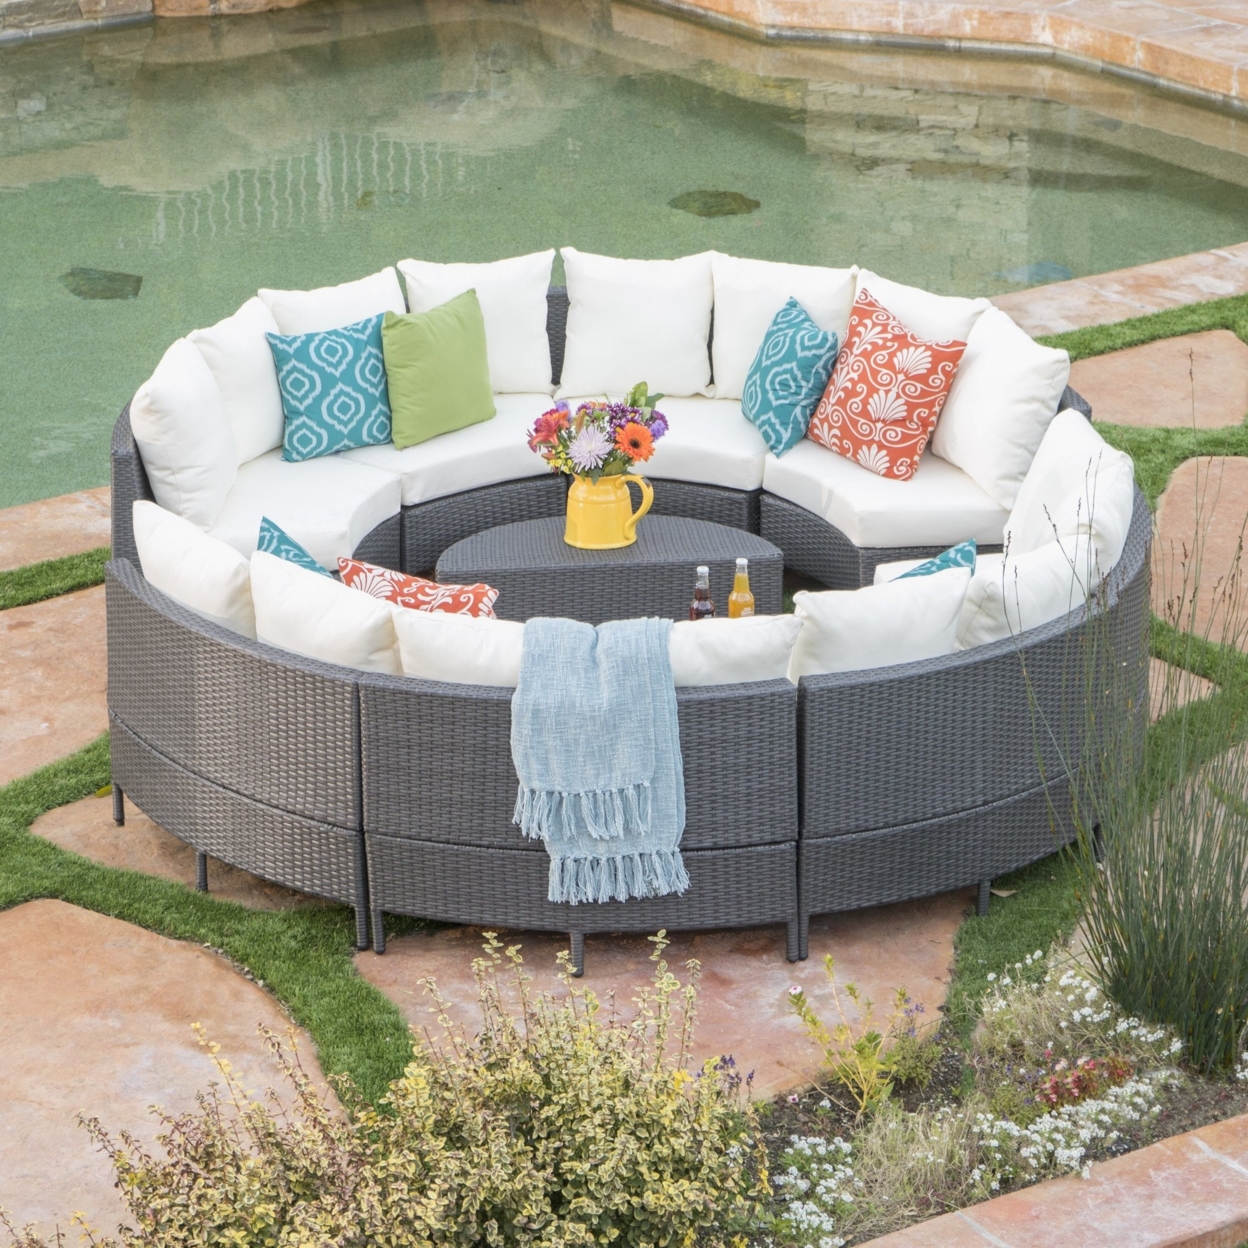 Alacati 10Pc Outdoor Wicker Sofa Set With Cushions - Multibrown / Gray